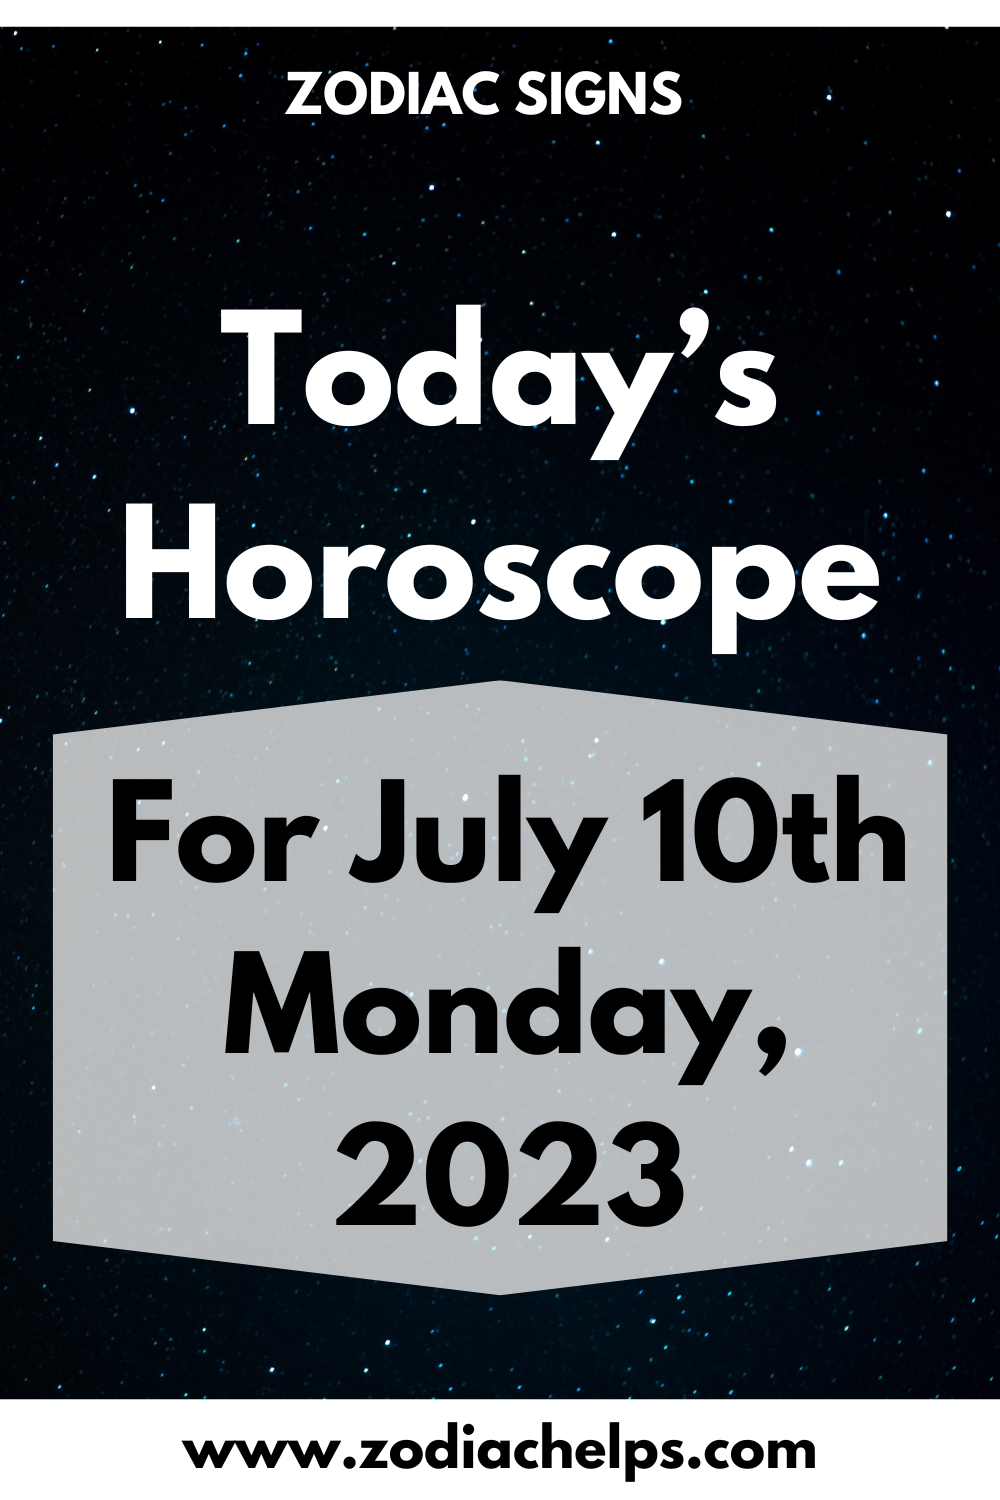 Today’s Horoscope for July 10th Monday, 2023